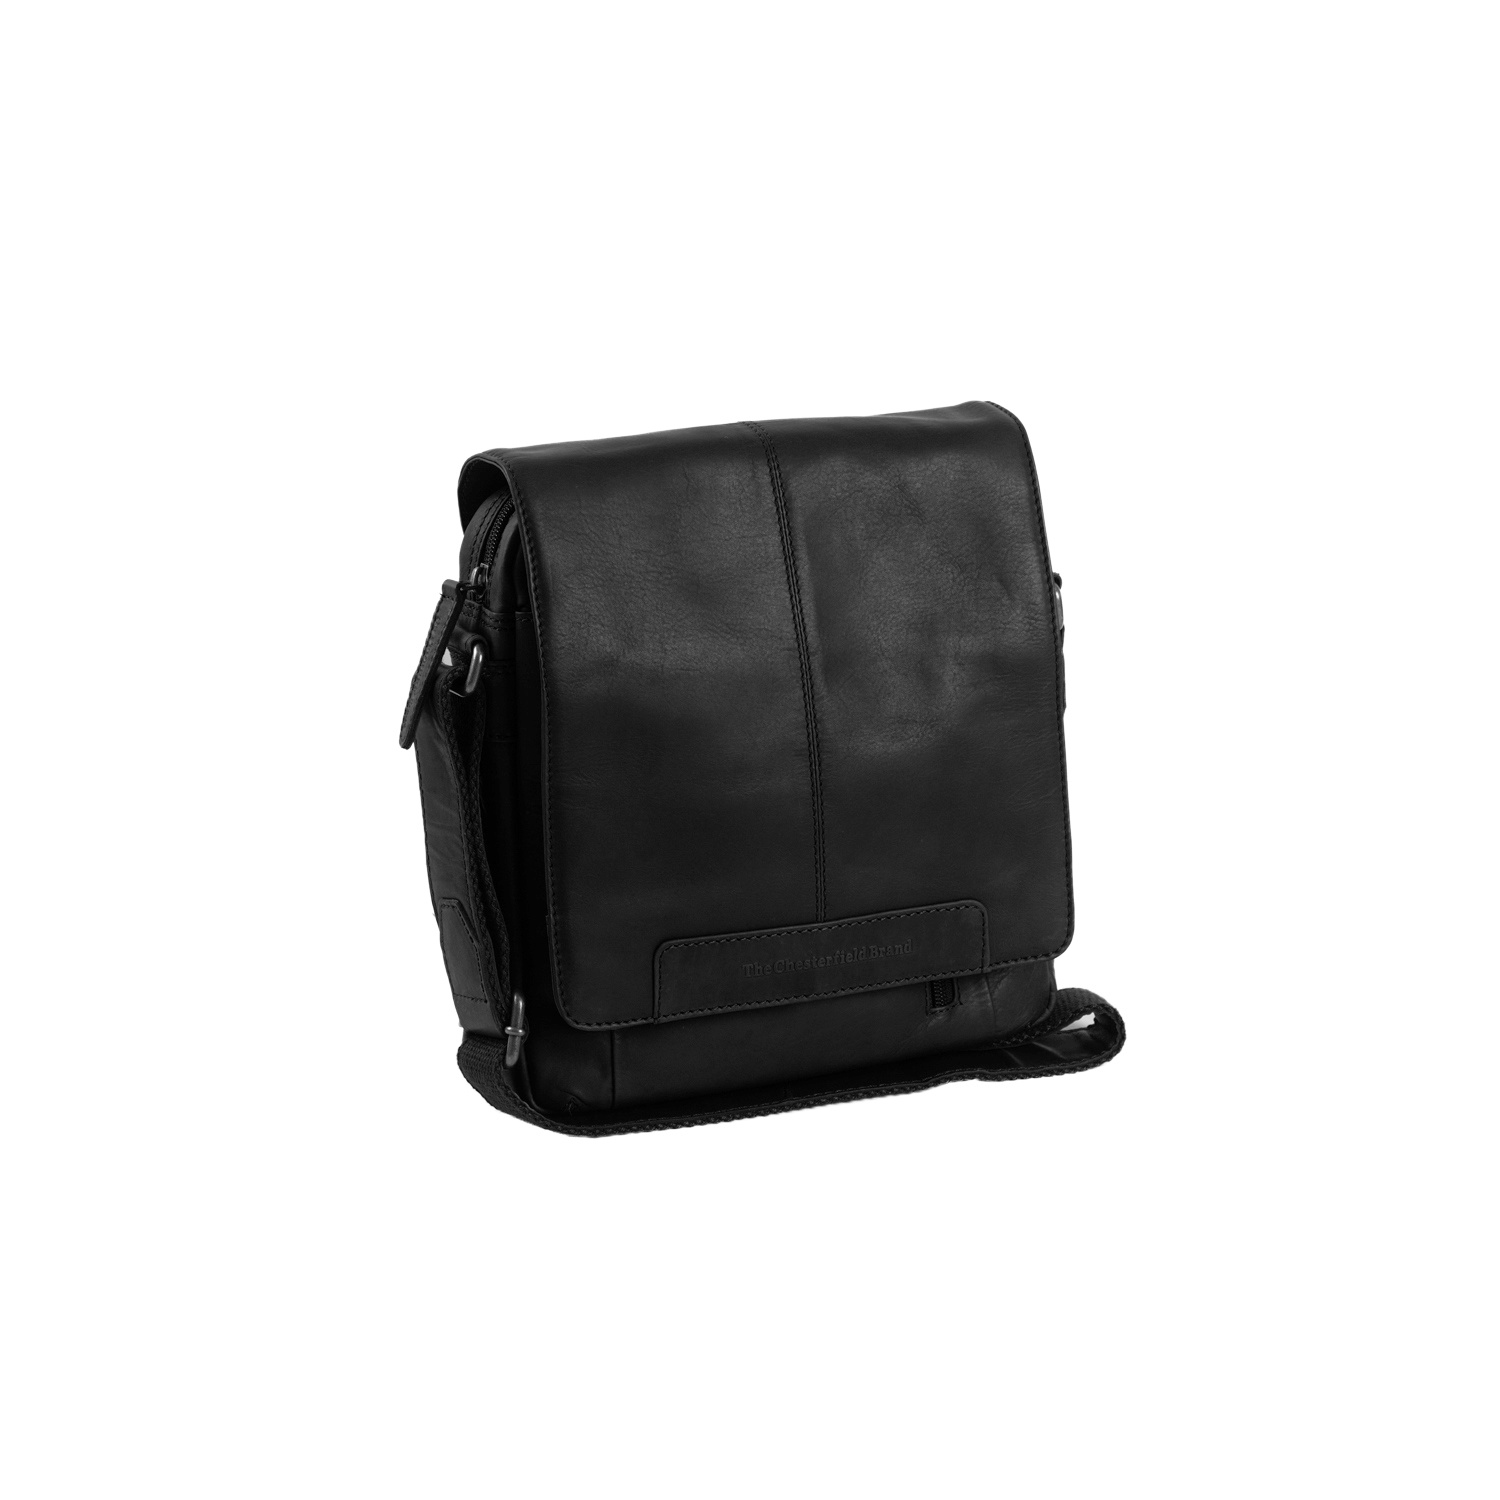 Leather Shoulder Bag Black Remy - The Chesterfield Brand